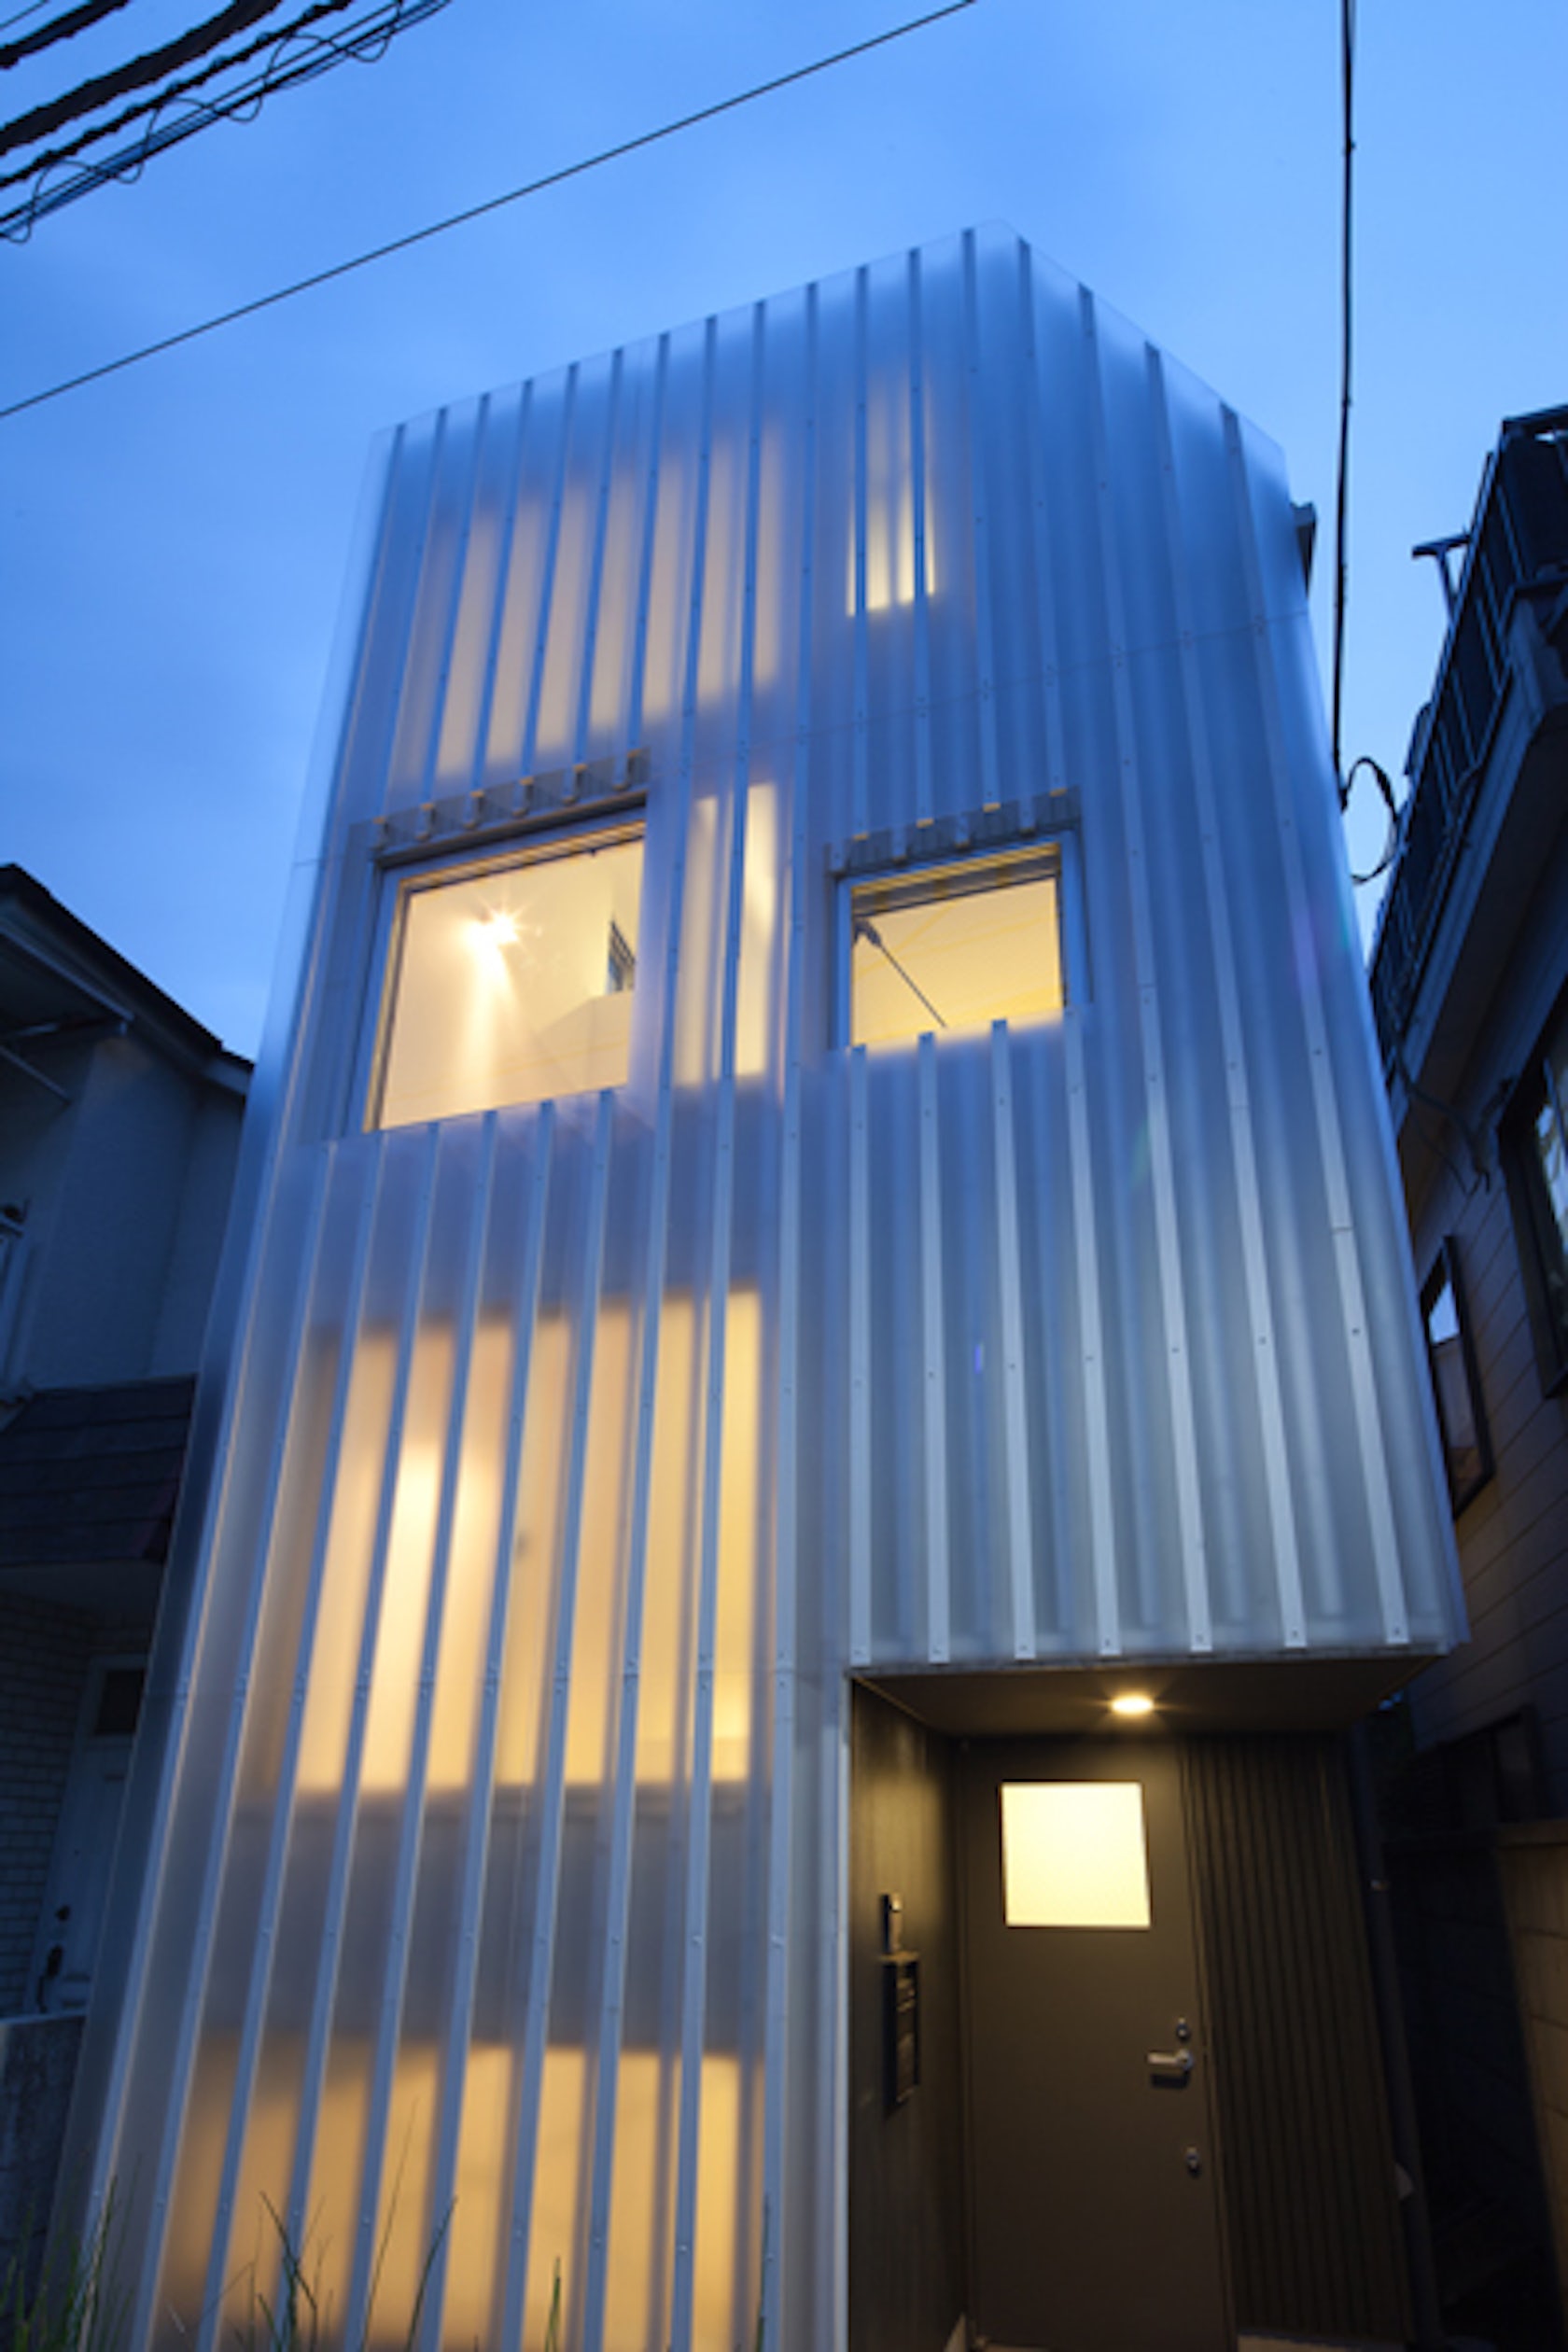 House in Kikuicho “a Double Skin house” - Architizer